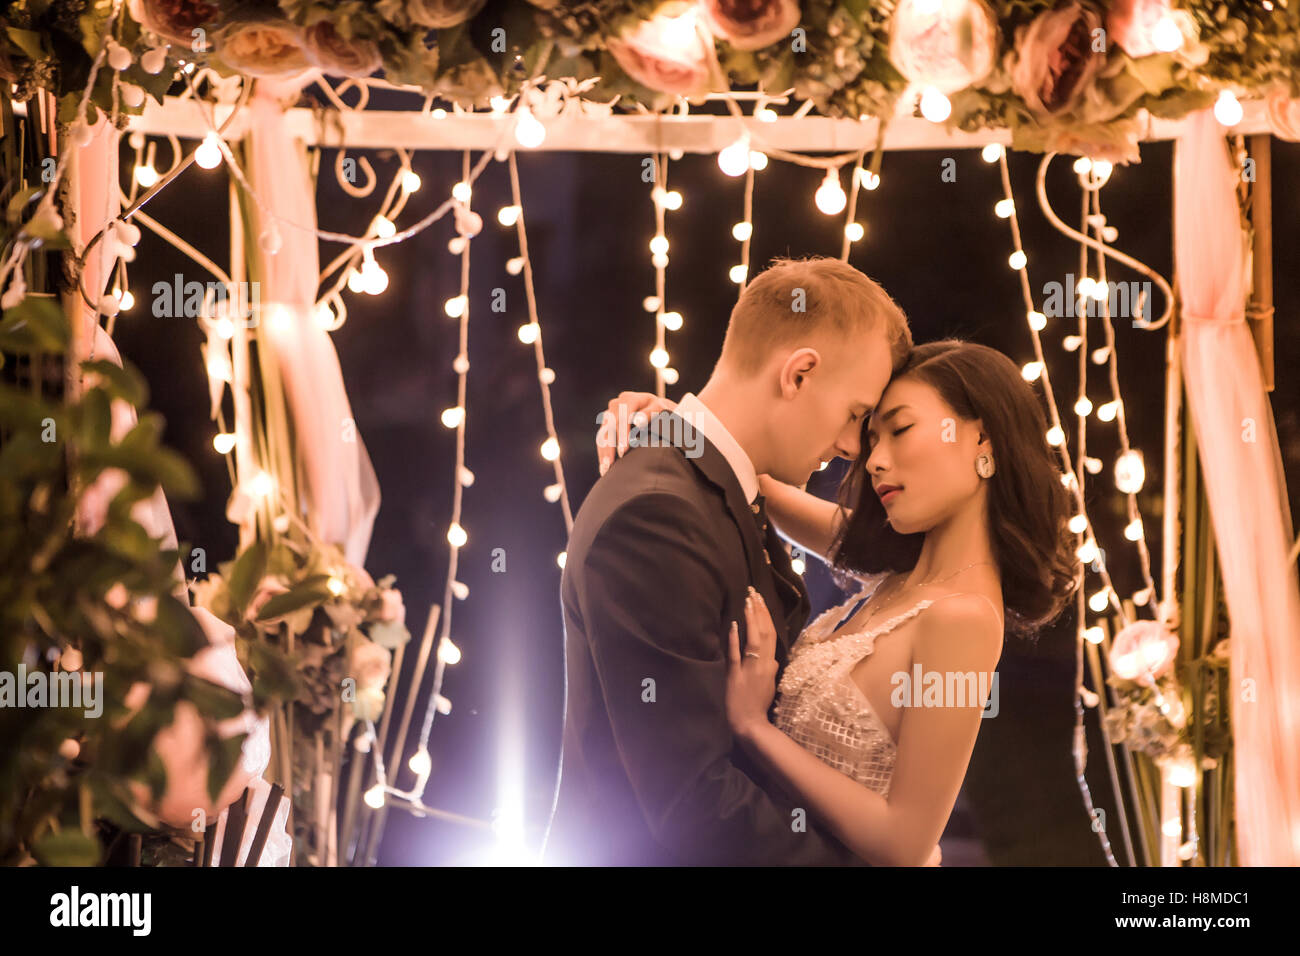 Side view of romantic couple embracing in illuminated gazebo at night Stock Photo